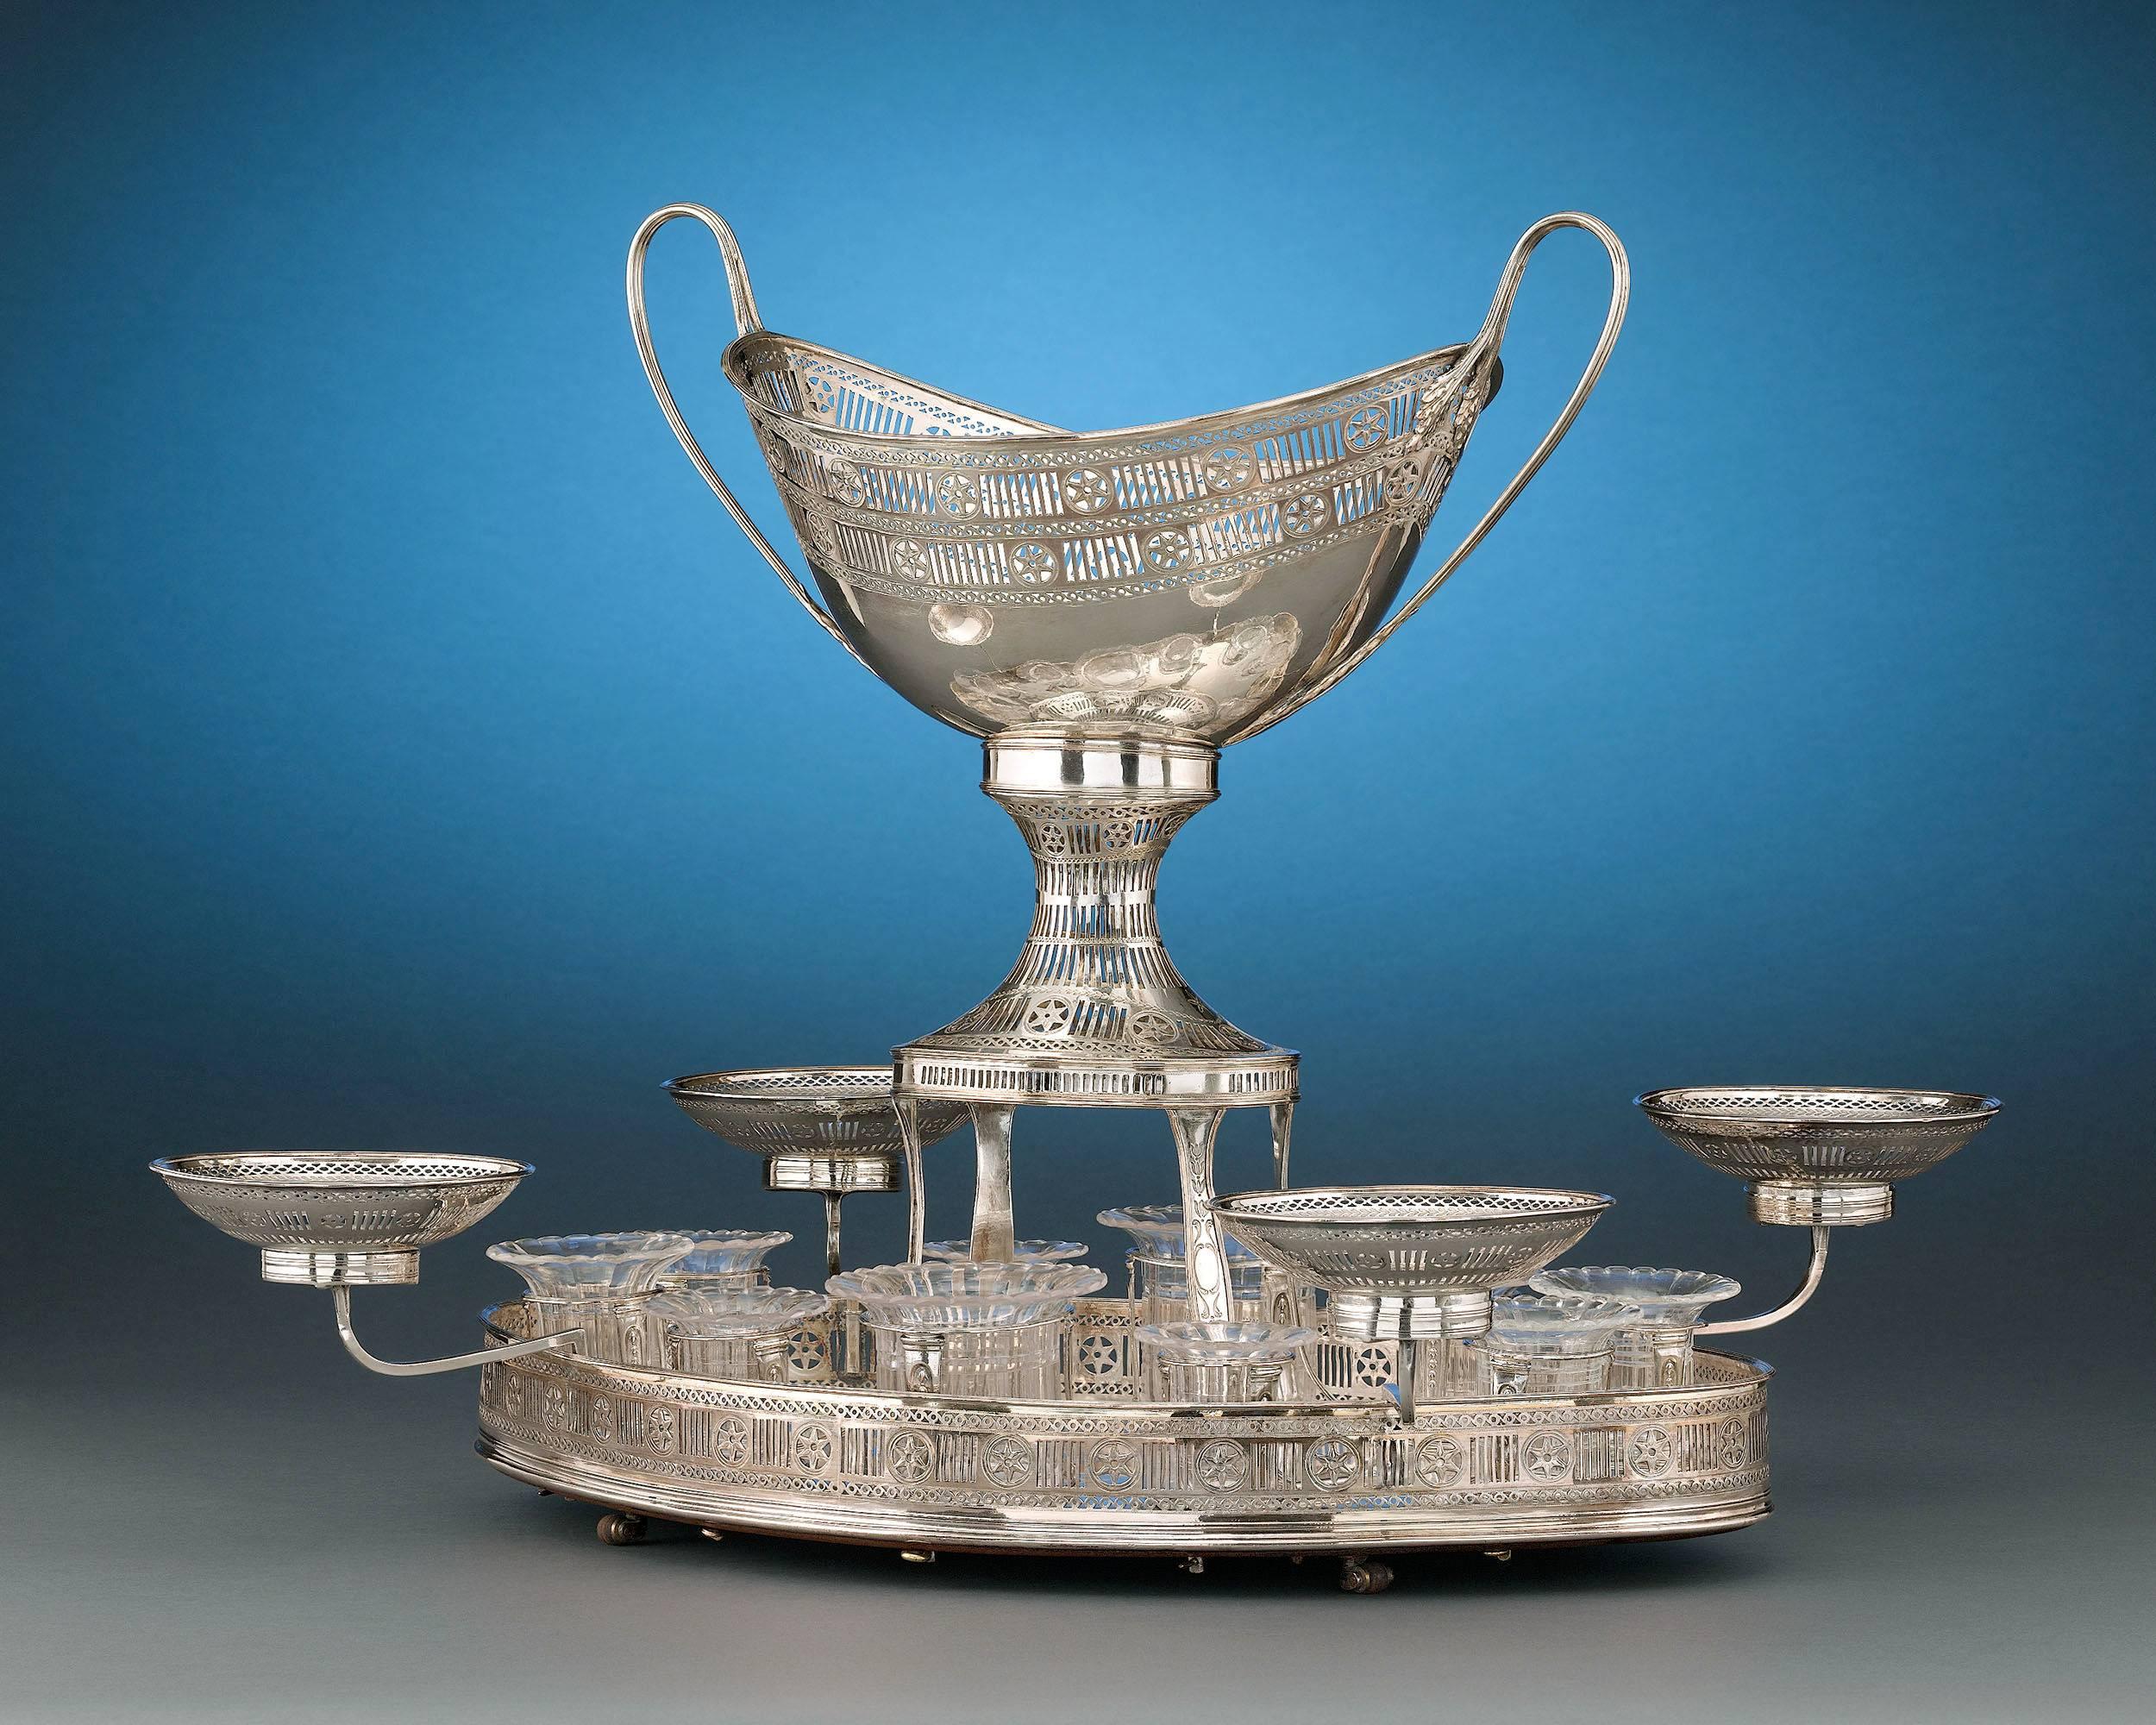 The perfect complement to a fine dining affair, this George III-period rolling dessert stand is crafted of desirable Sheffield silver plate. In this modified version of an epergne, this centerpiece features an urn-form basket encircled by pierced